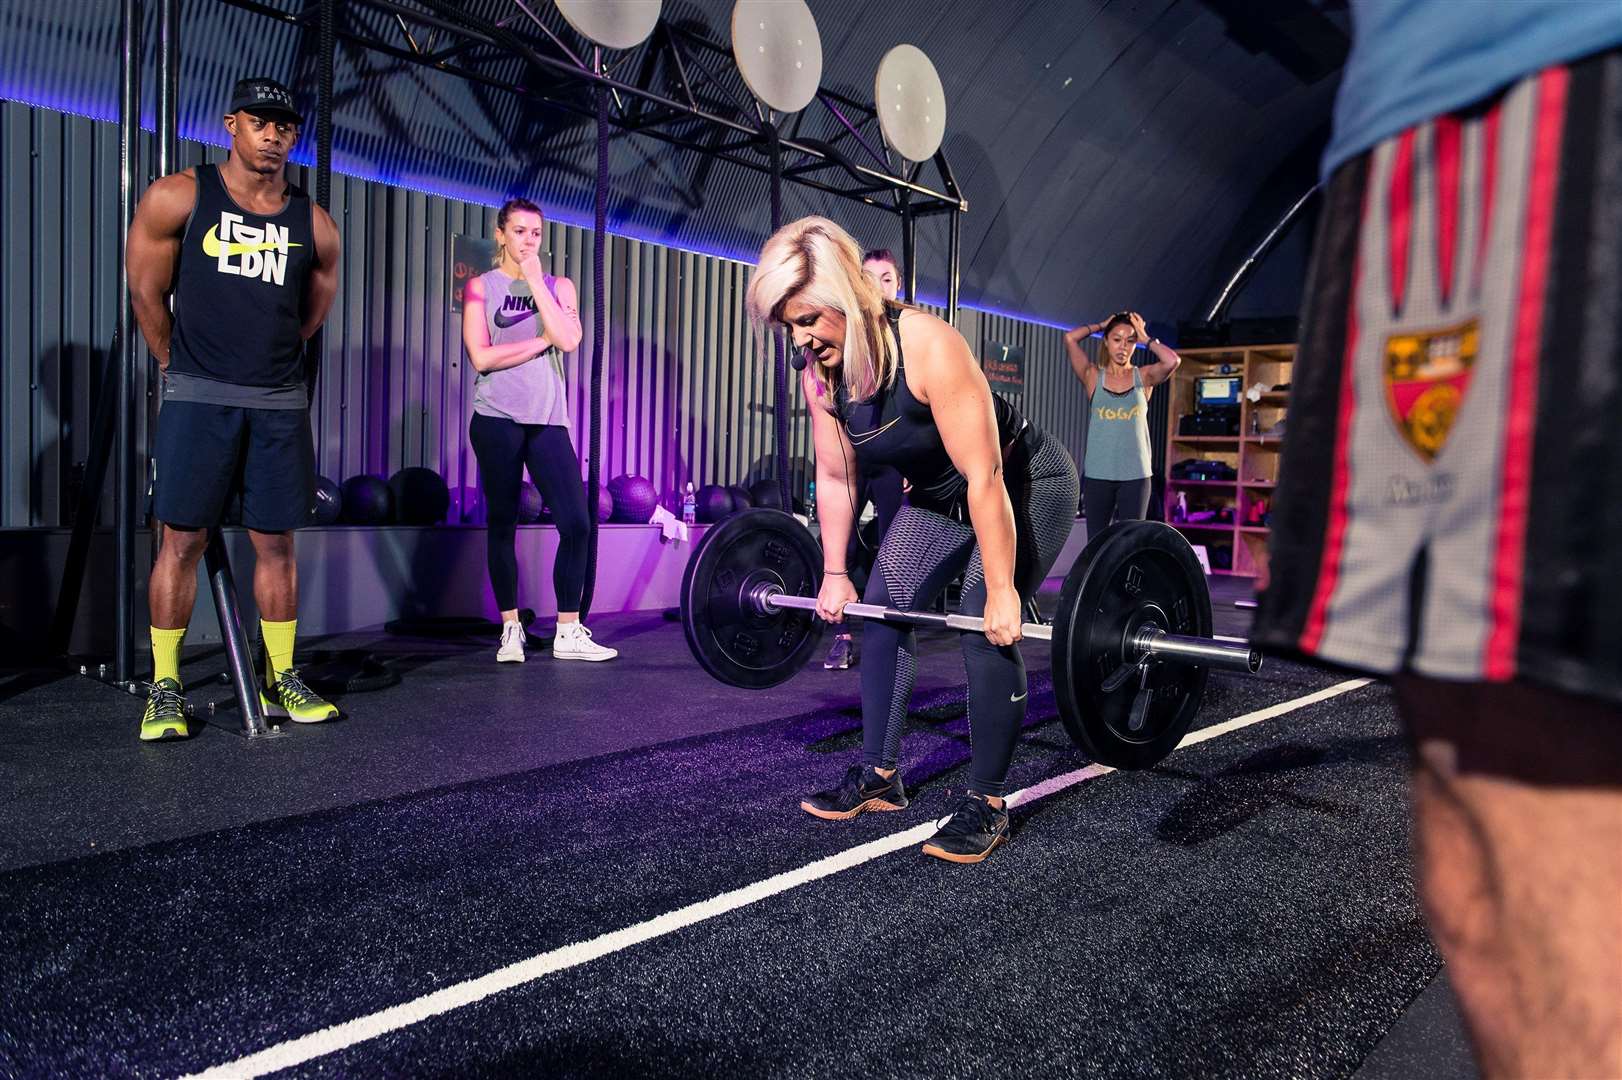 Laura demonstrating how to lift weights